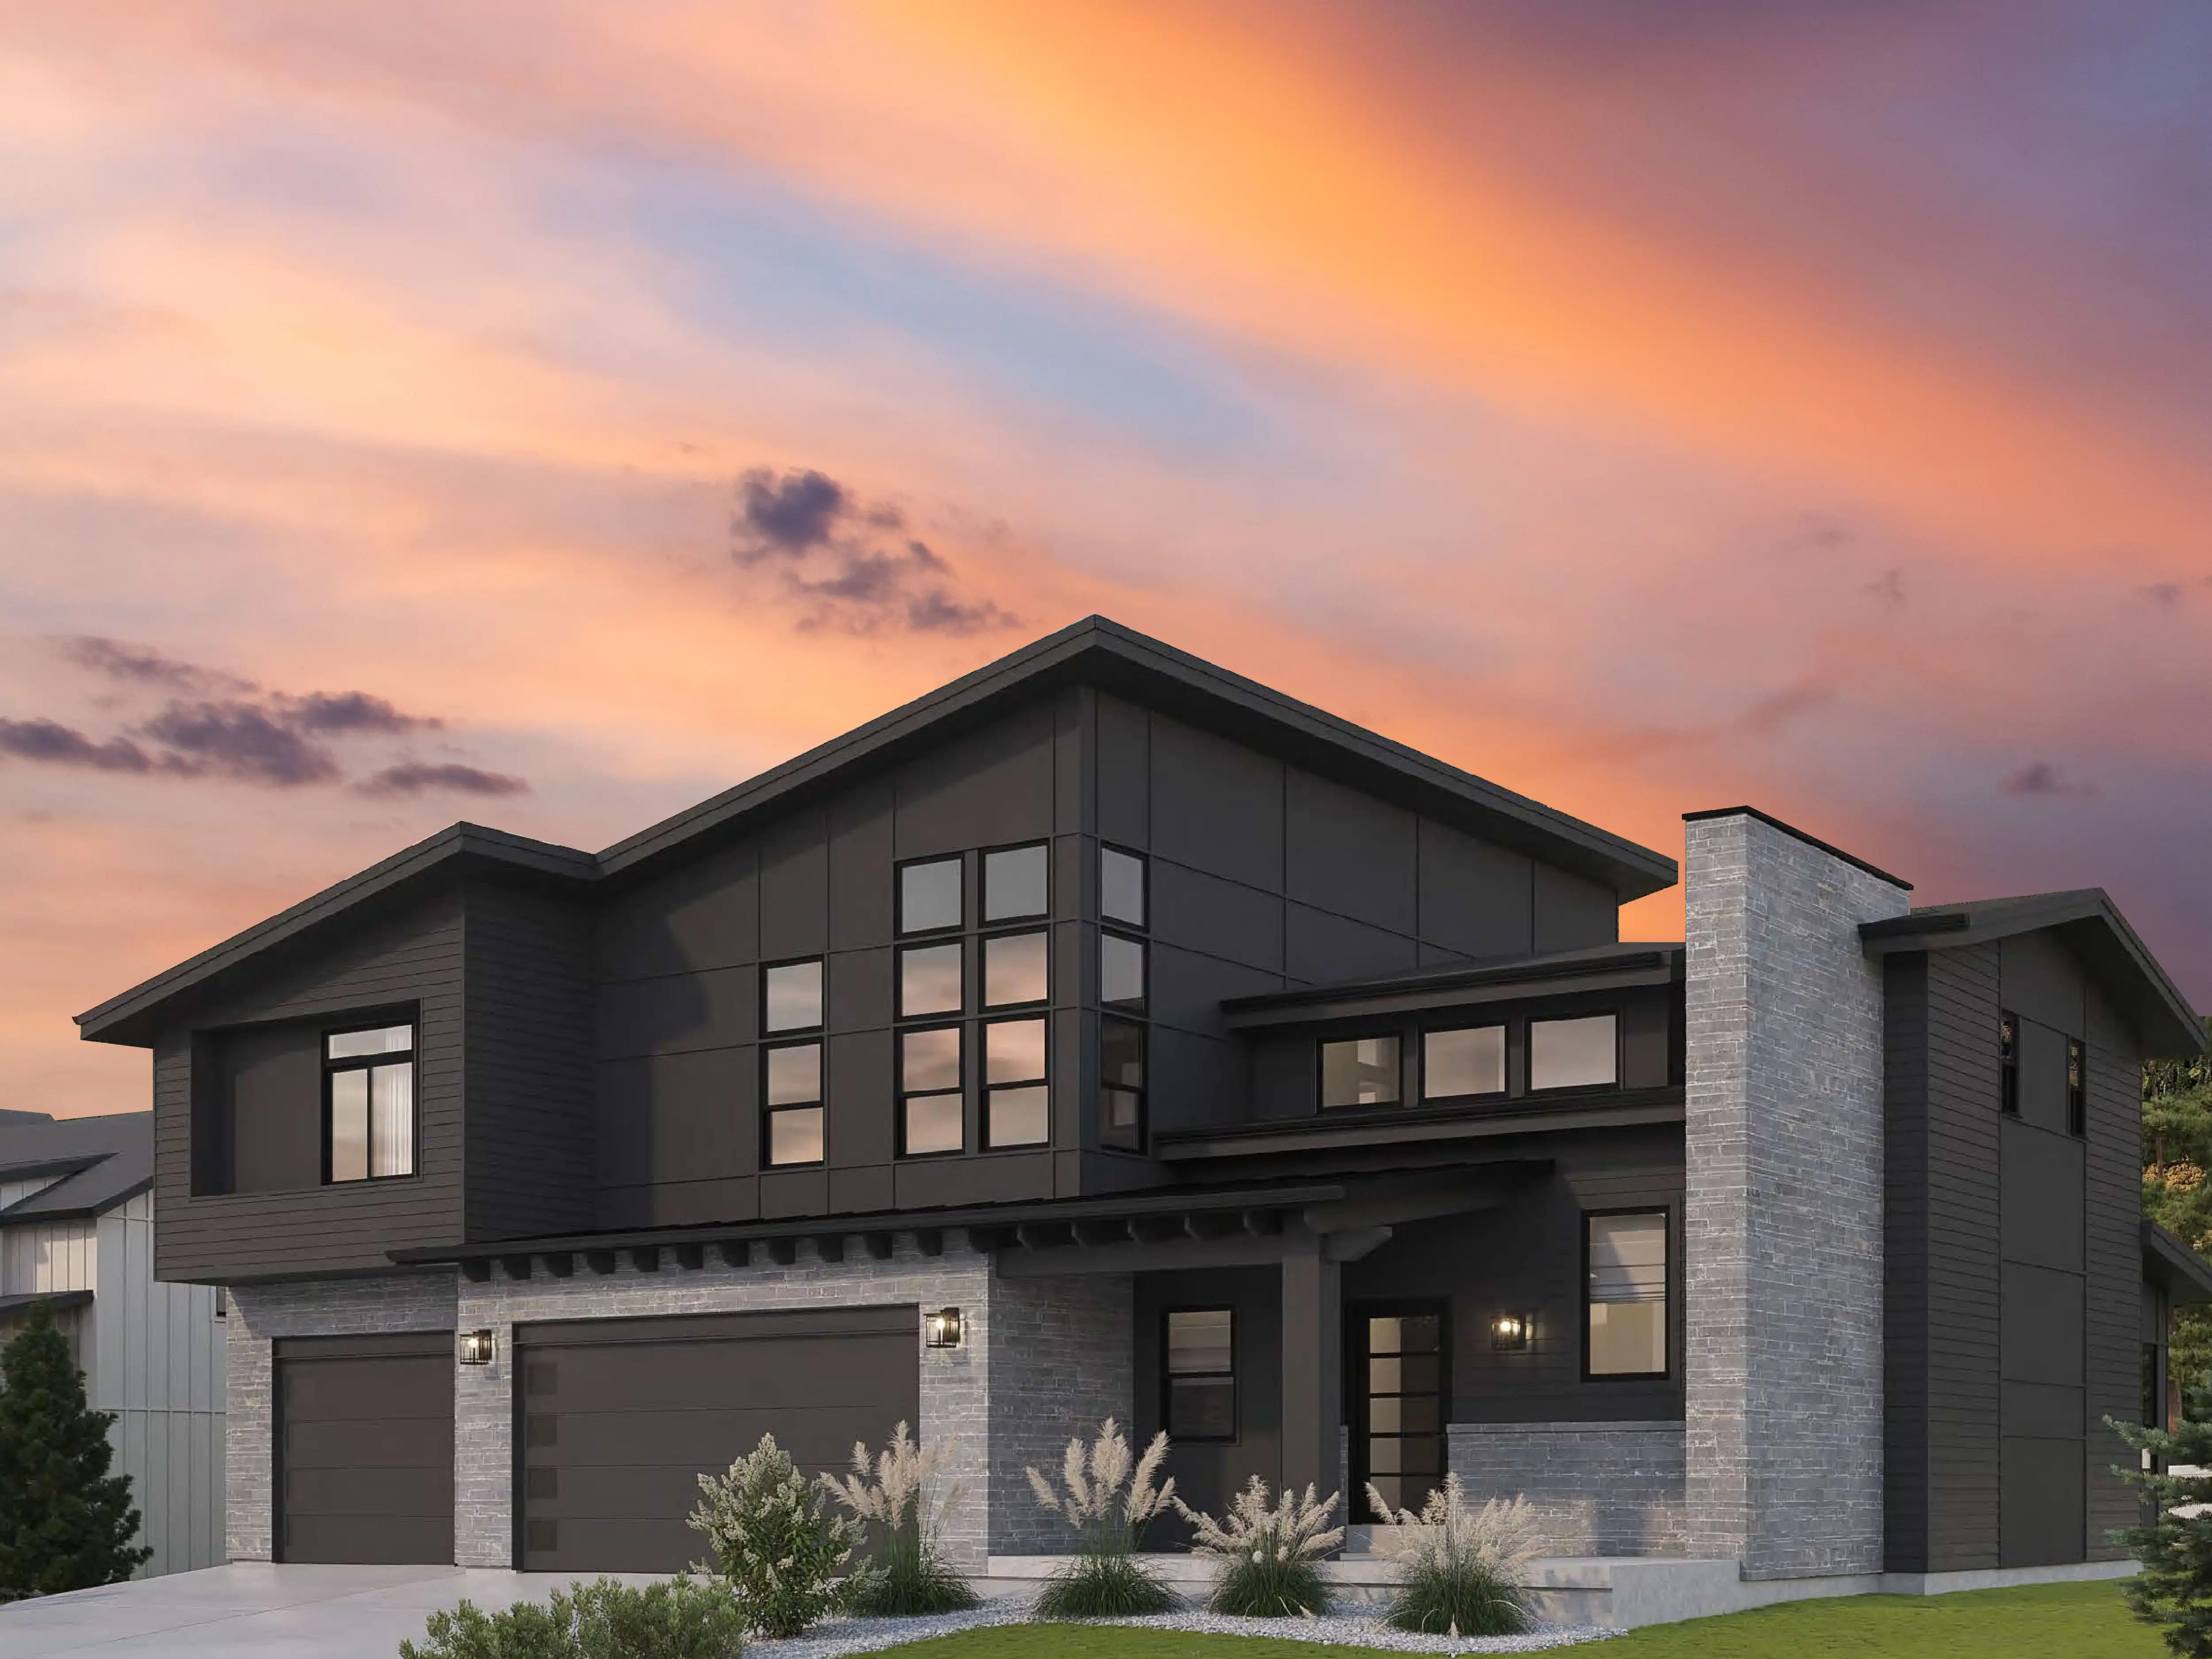 Artistic rendering of theBasin Parade of Homes Featured Home